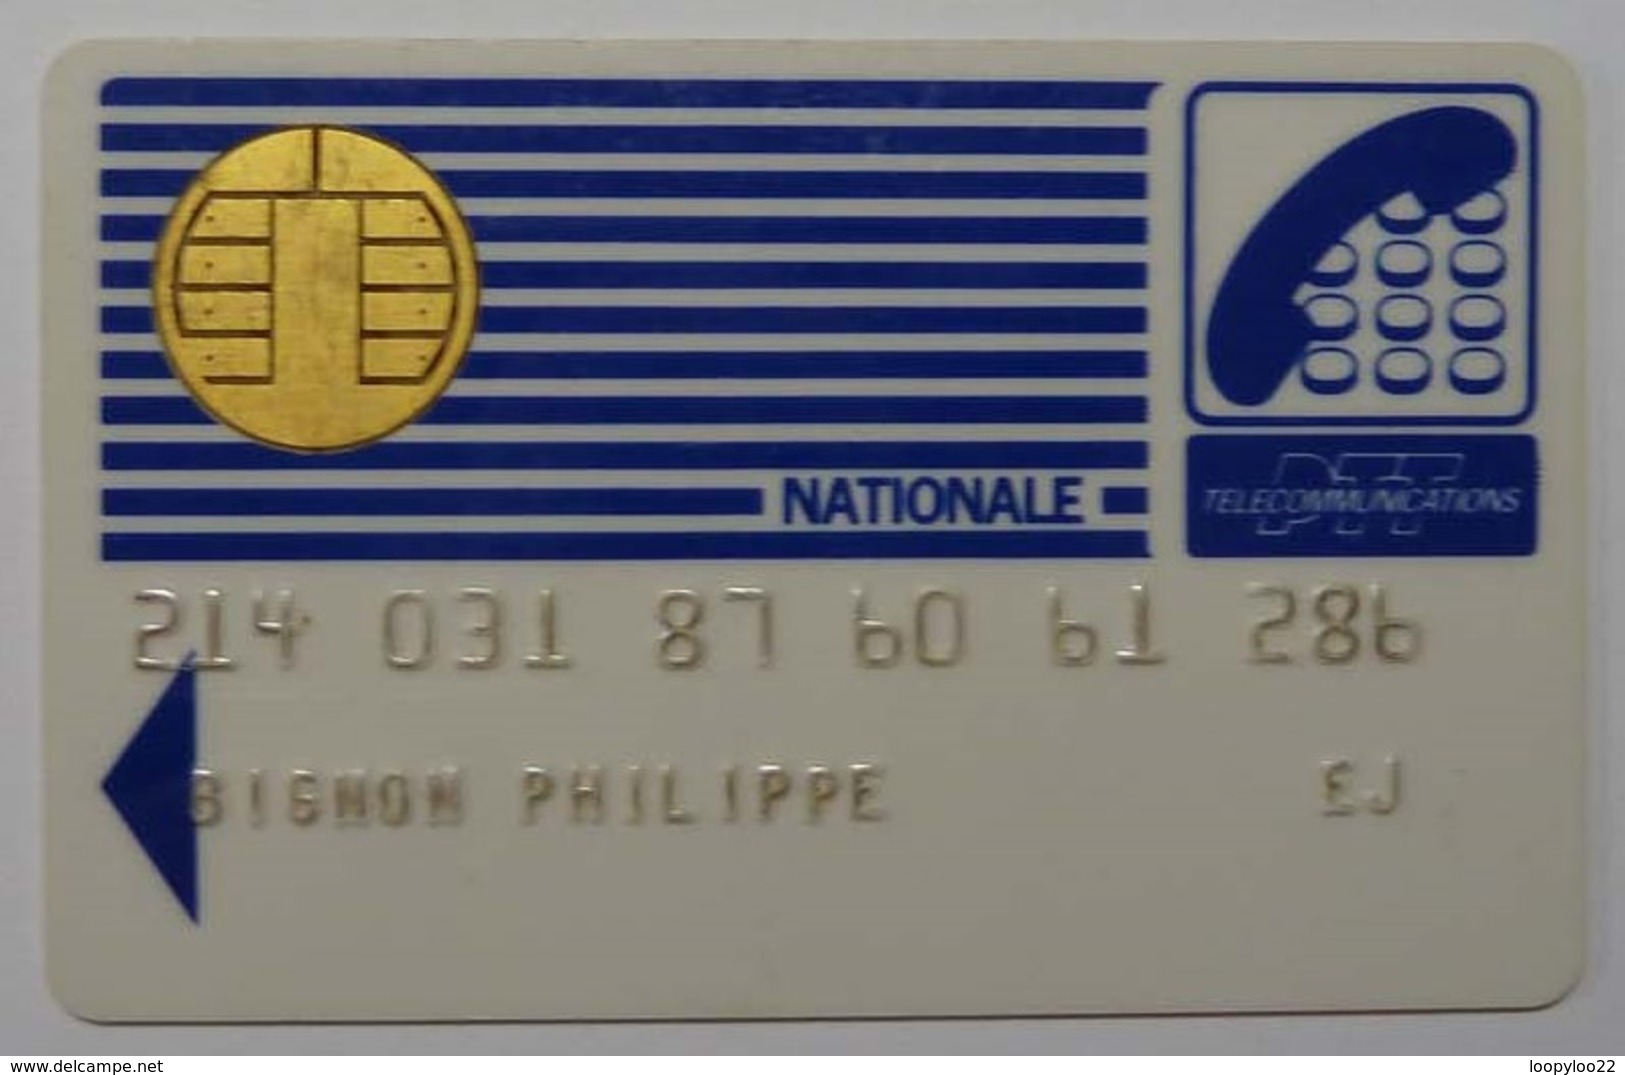 FRANCE - Bull Chip 1 - Rare Early Issue - Carte Telecommunications Nationale Calling Card - PTT - Used - Privat